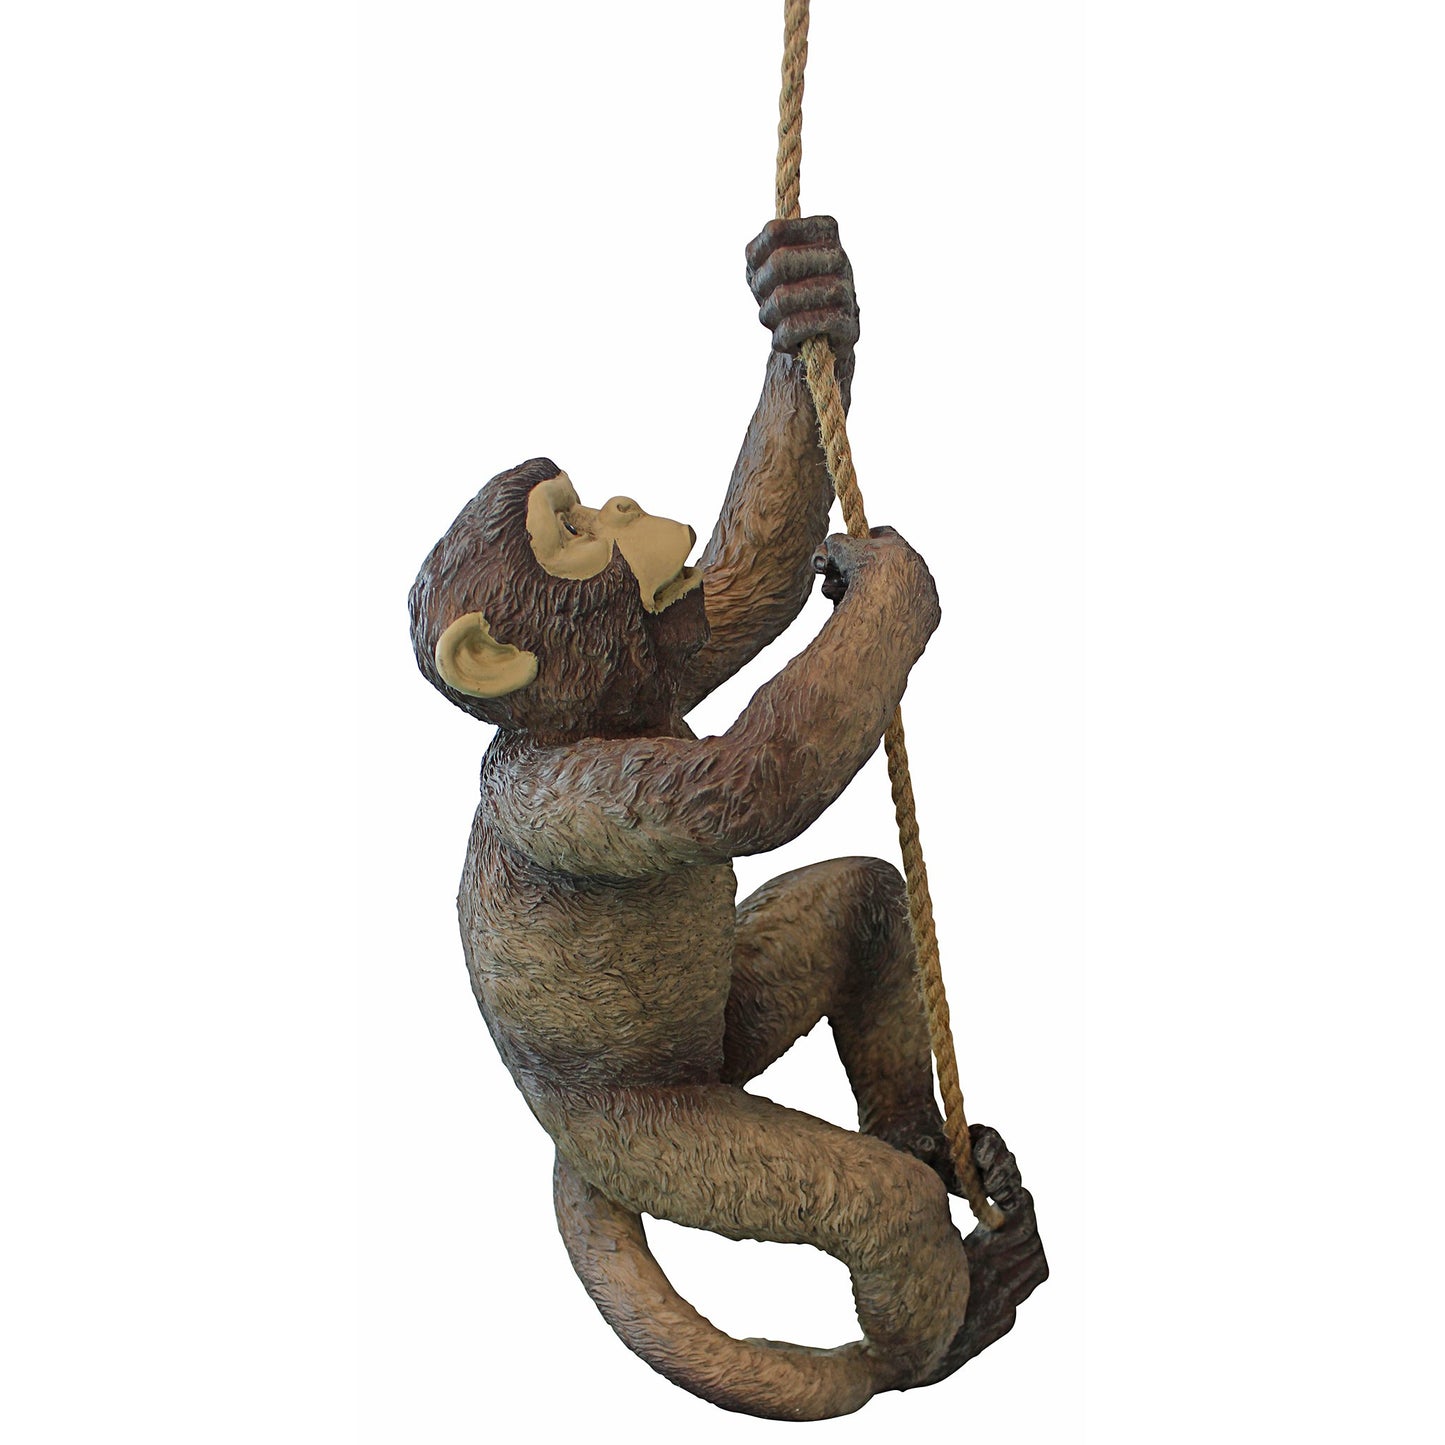 Right hand facing fake monkey made from resin climbing up a rope on a white background